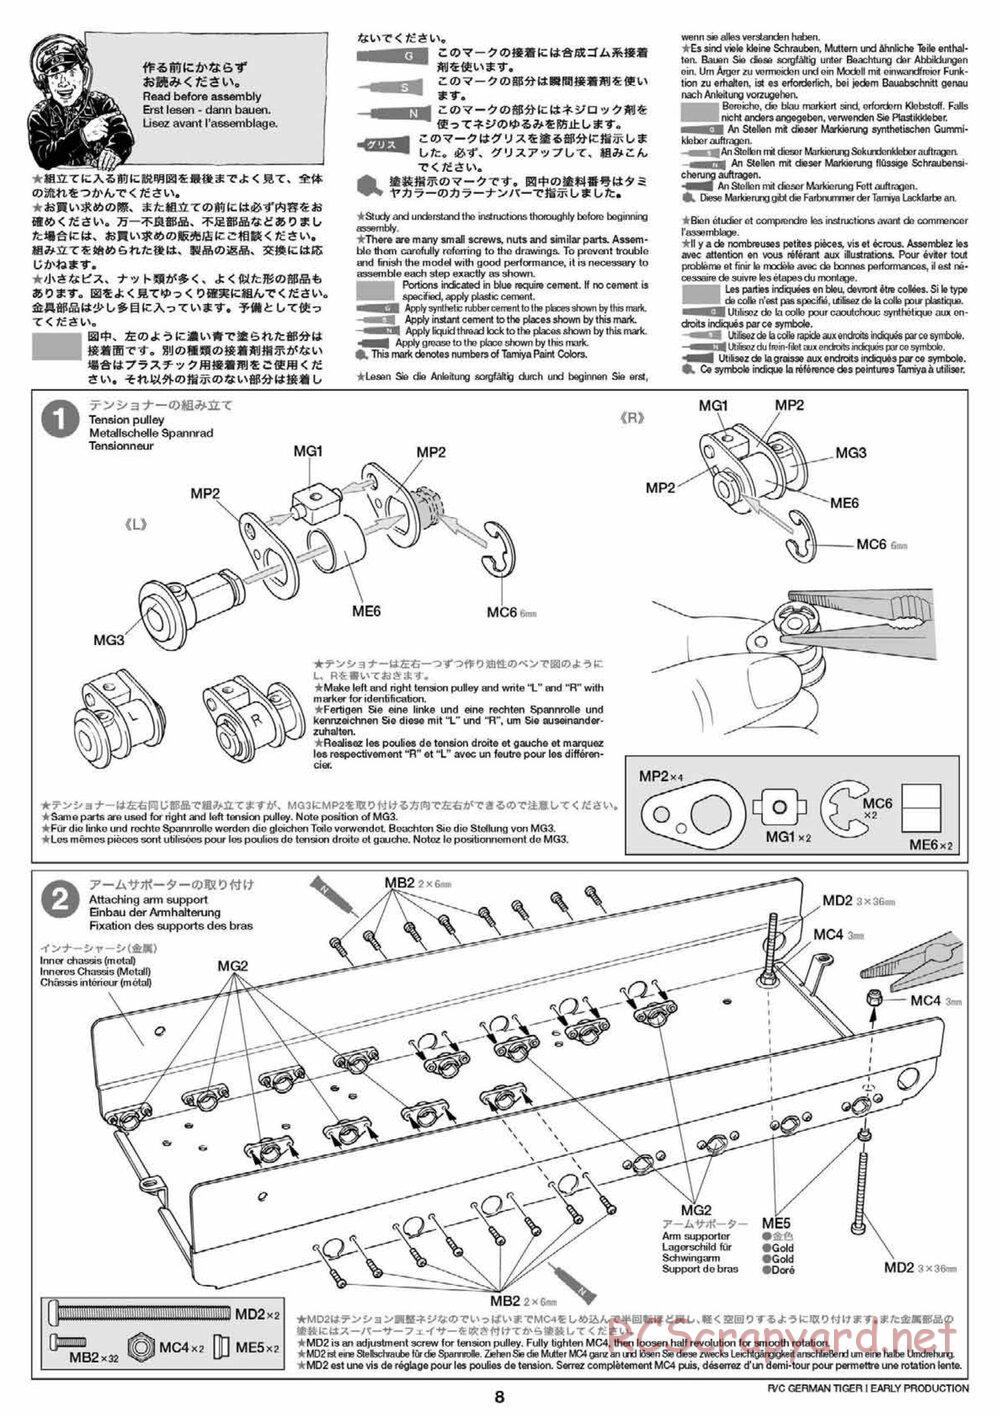 Tamiya - Tiger I Early Production - 1/16 Scale Chassis - Manual - Page 8